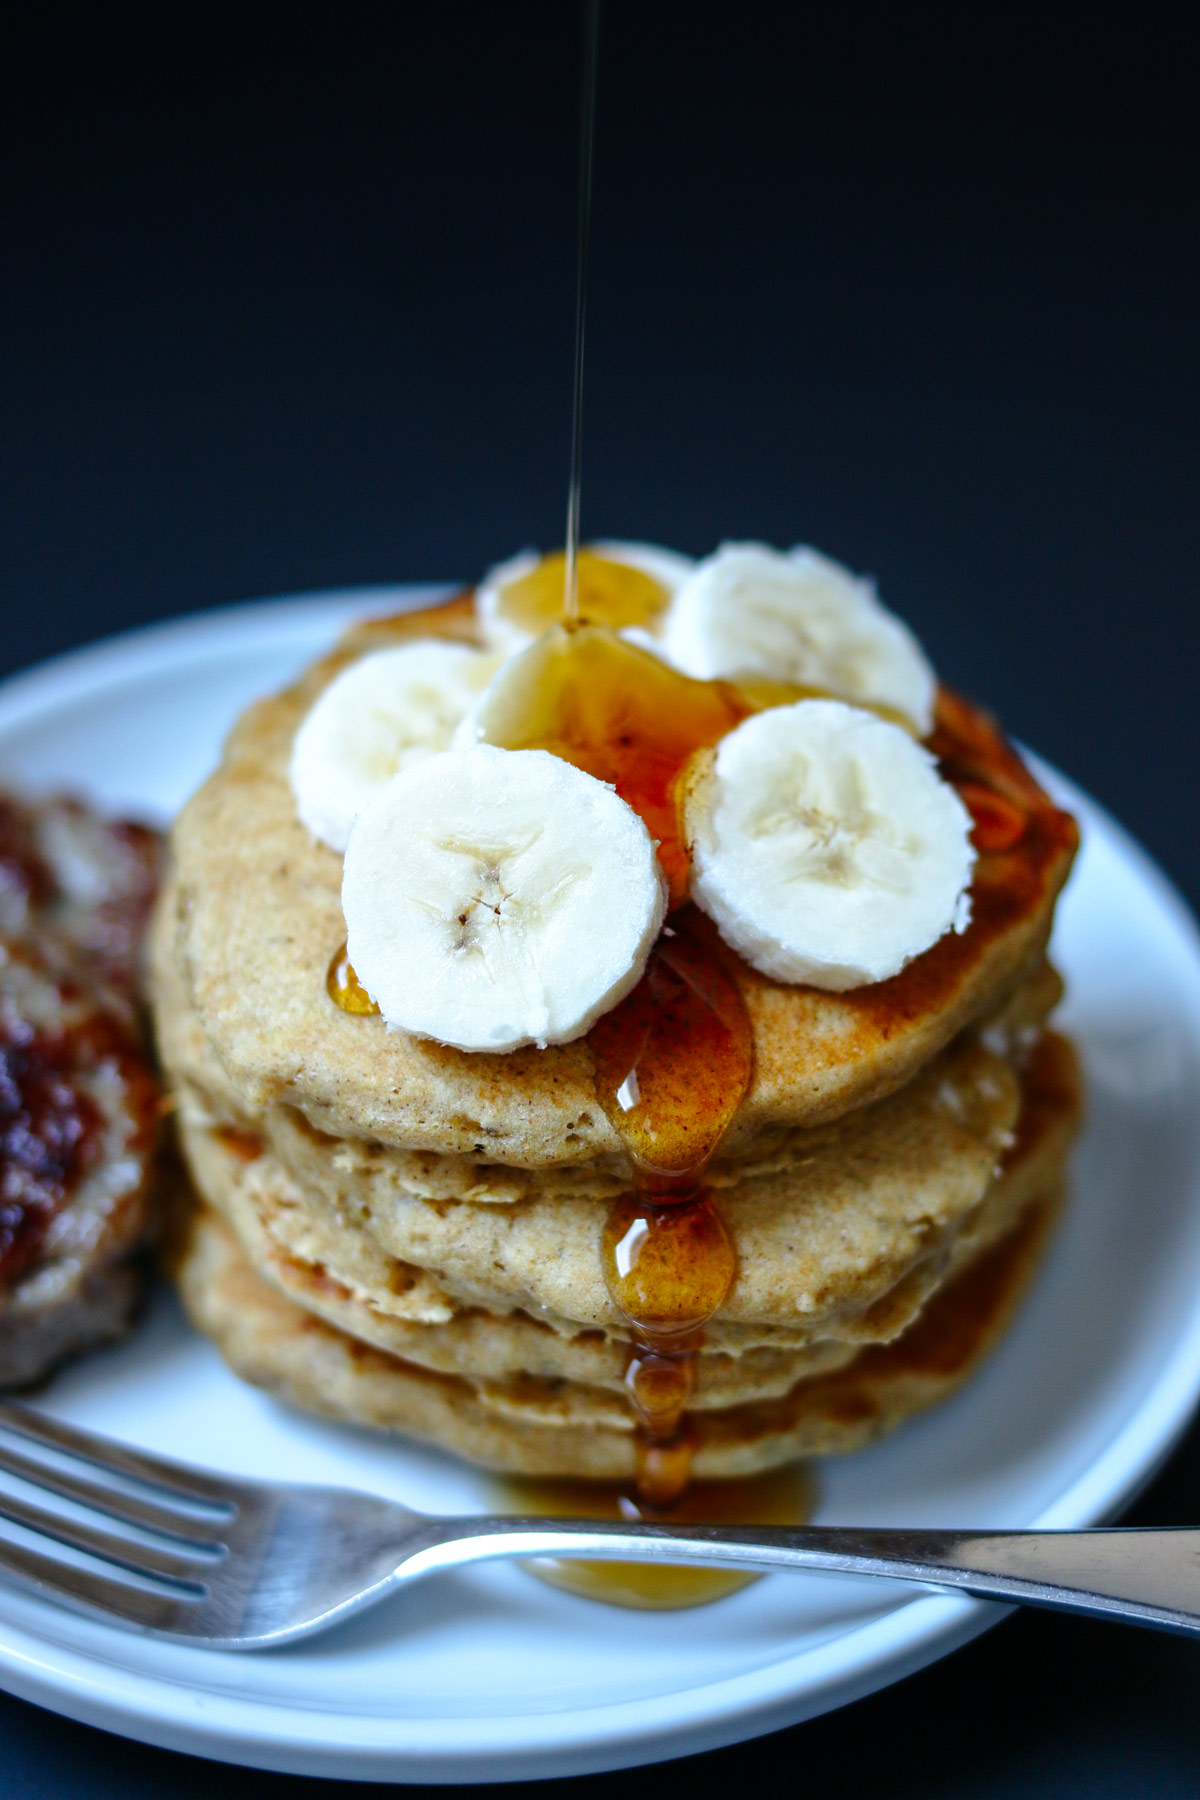 shot of maple syrup pouring onto banana slices atop whole wheat pancakes on a plate with sausage patties and a fork.